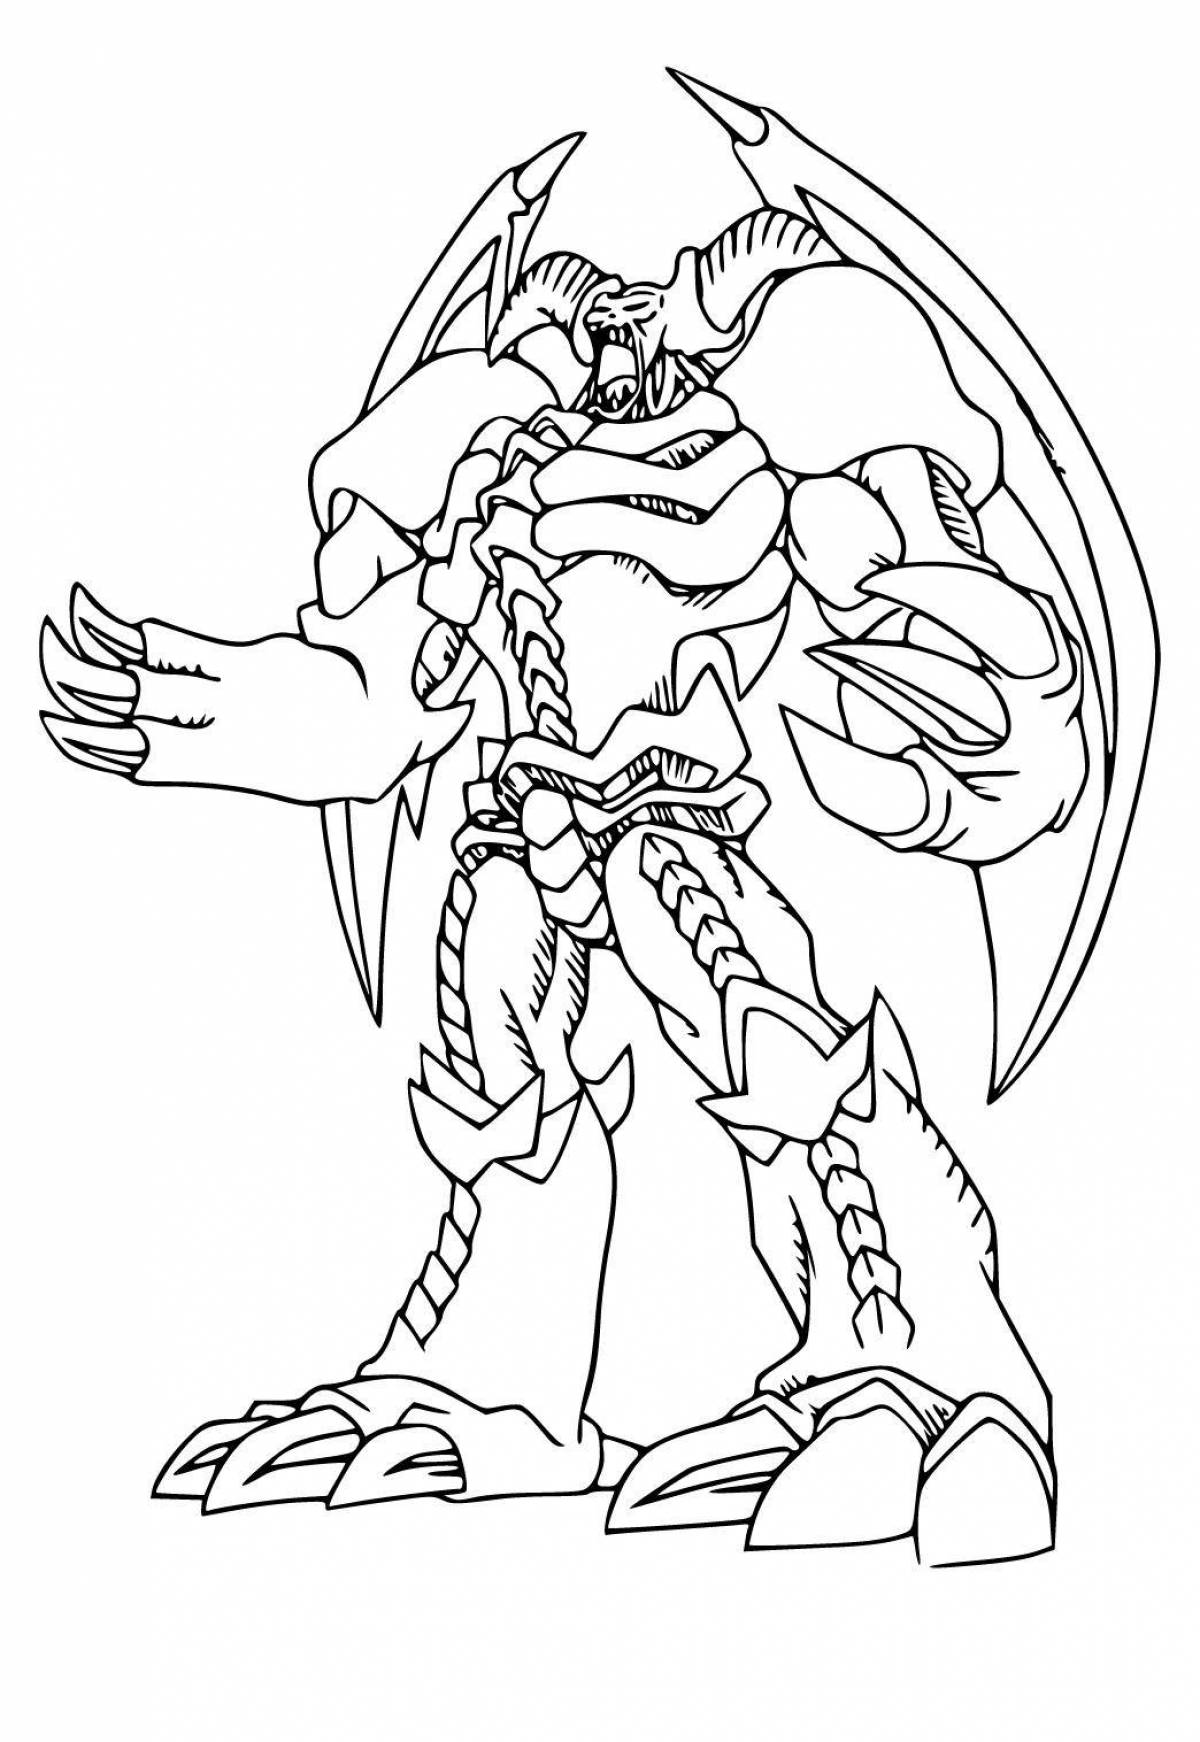 Sweet bakugan coloring pages for kids